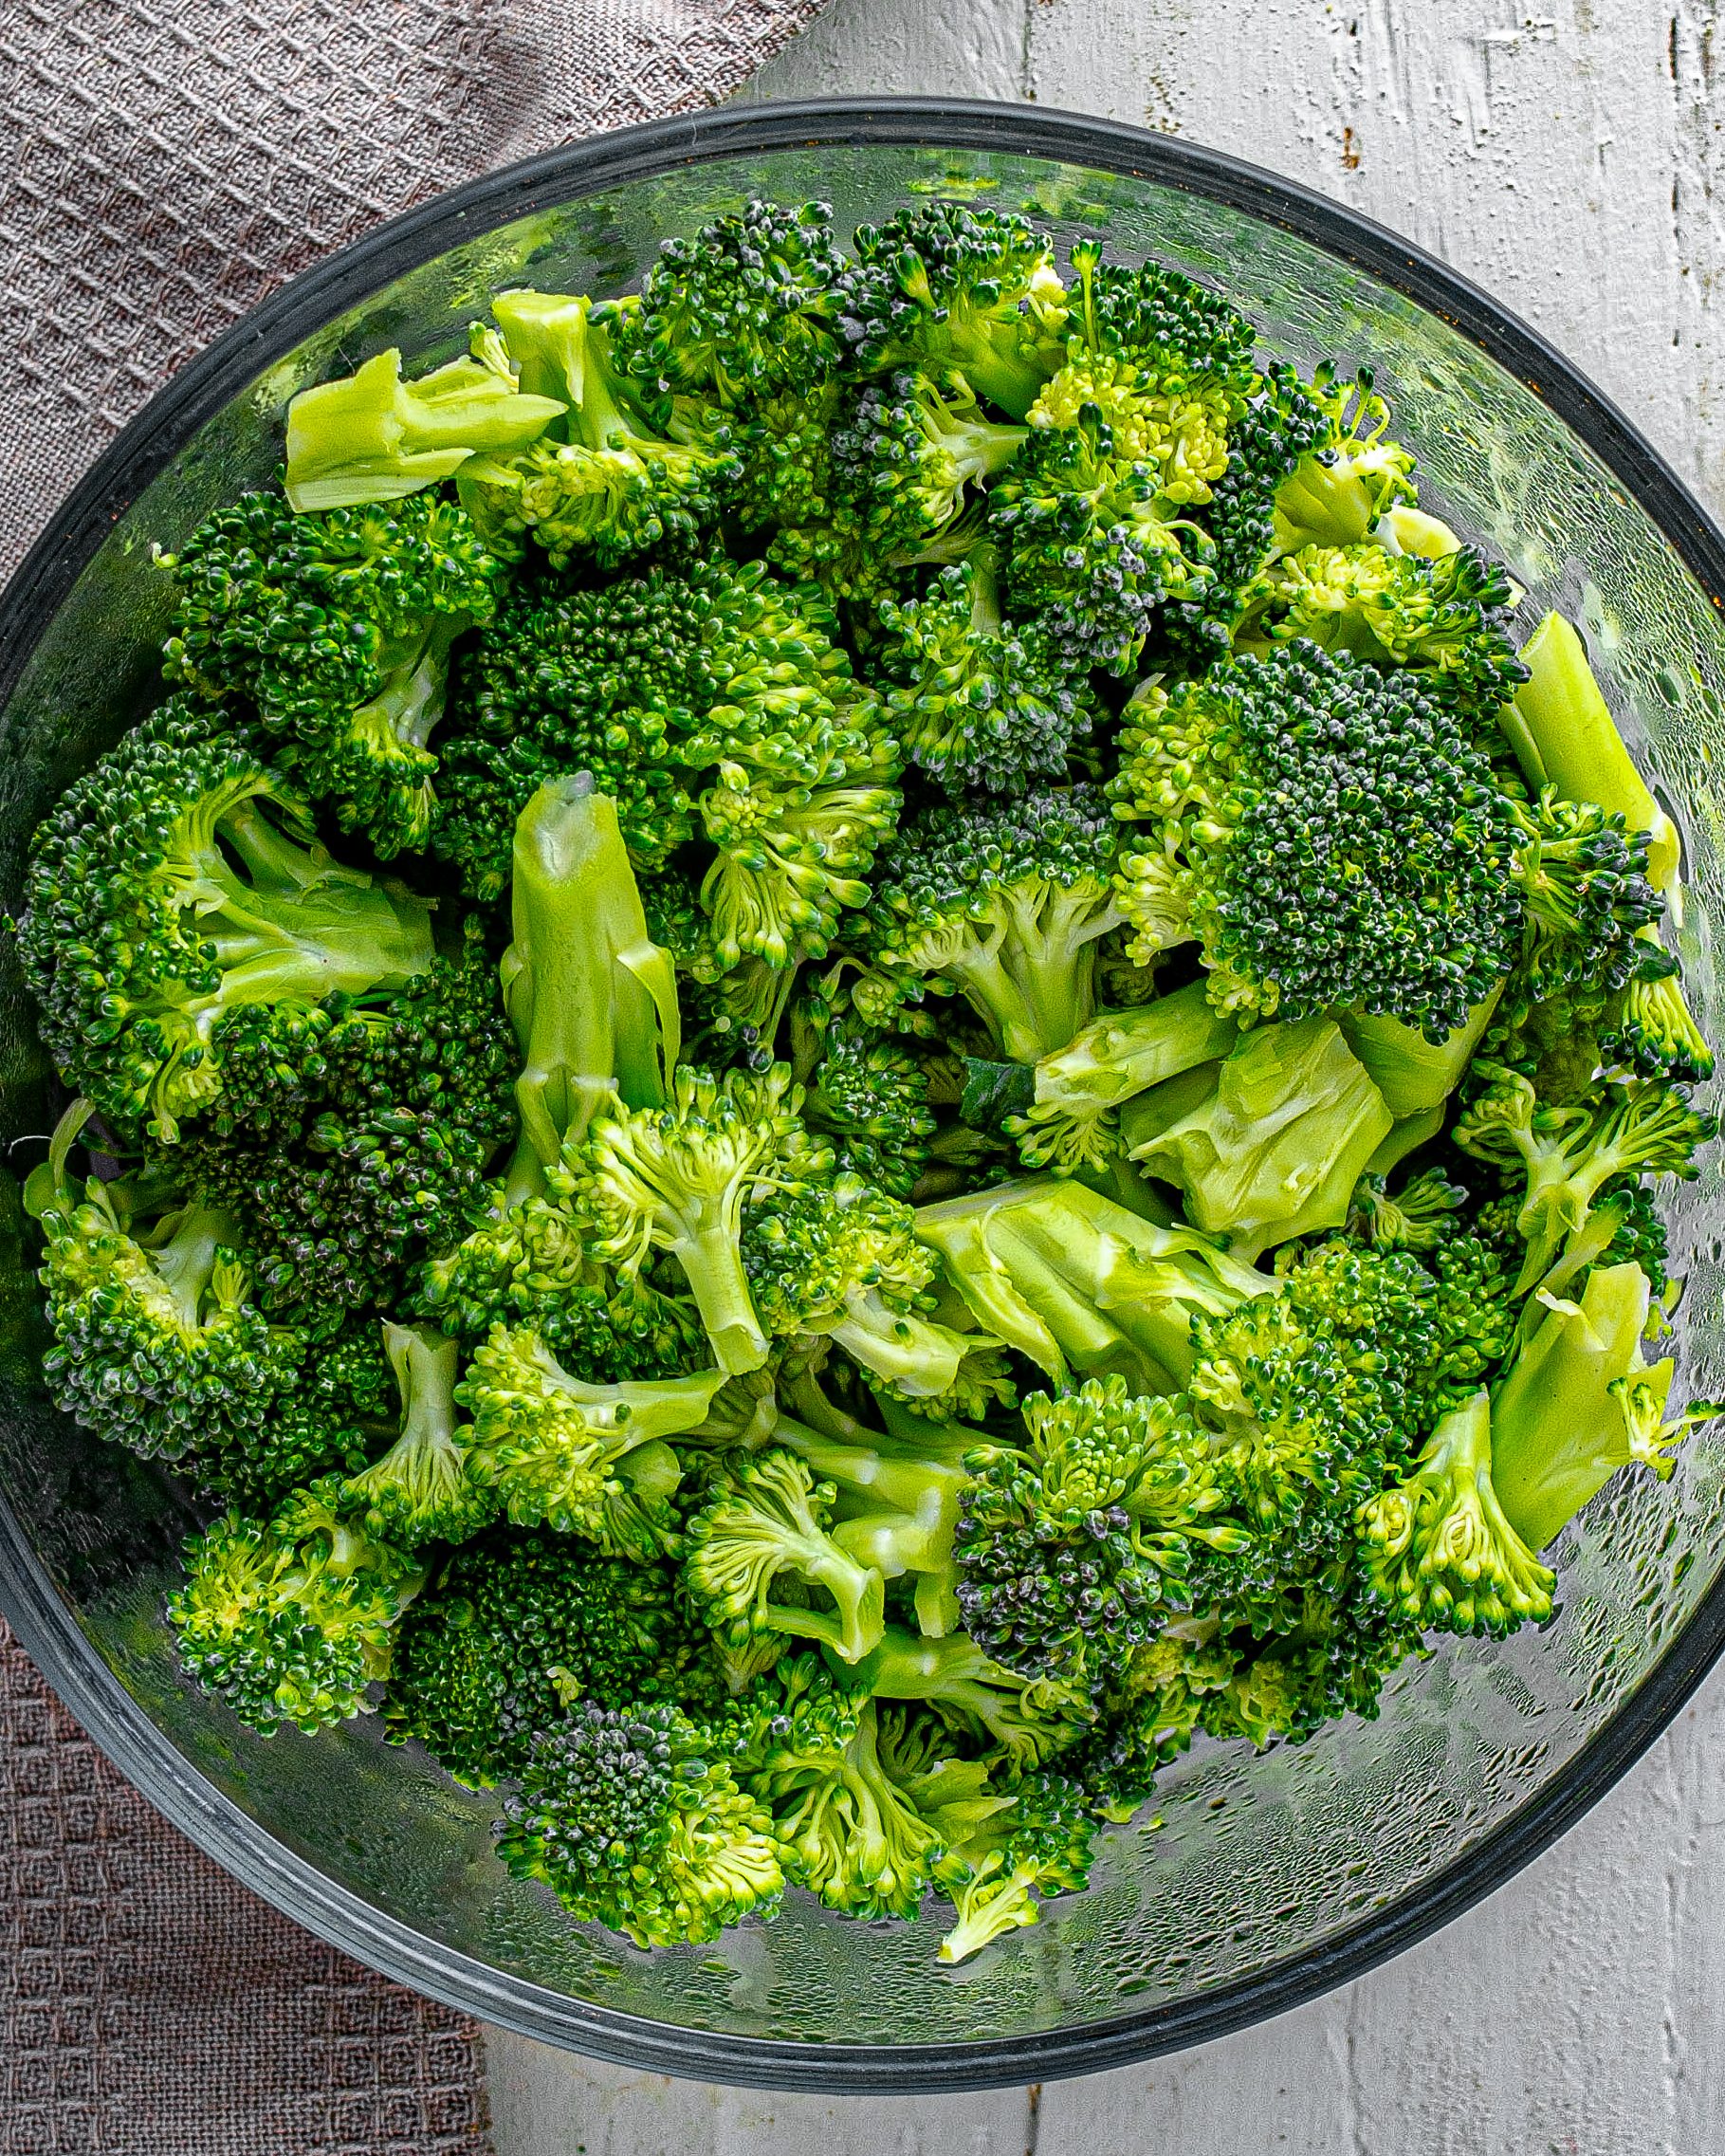 Steam the broccoli until done to your liking.